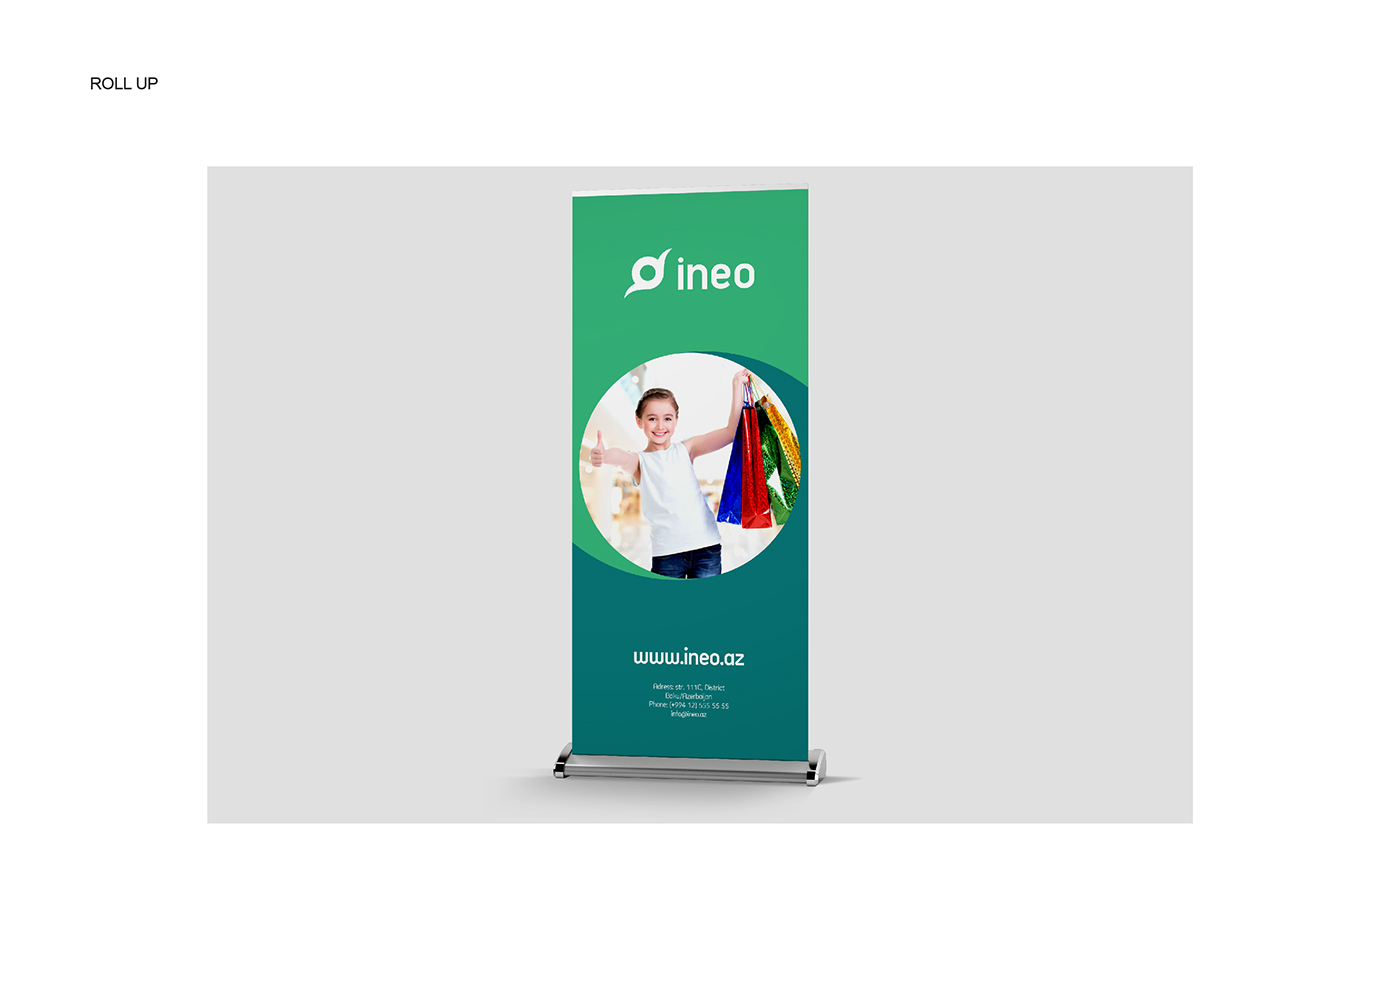 ineo clothes billboard branding  business card green sprout discount Shopping uniform